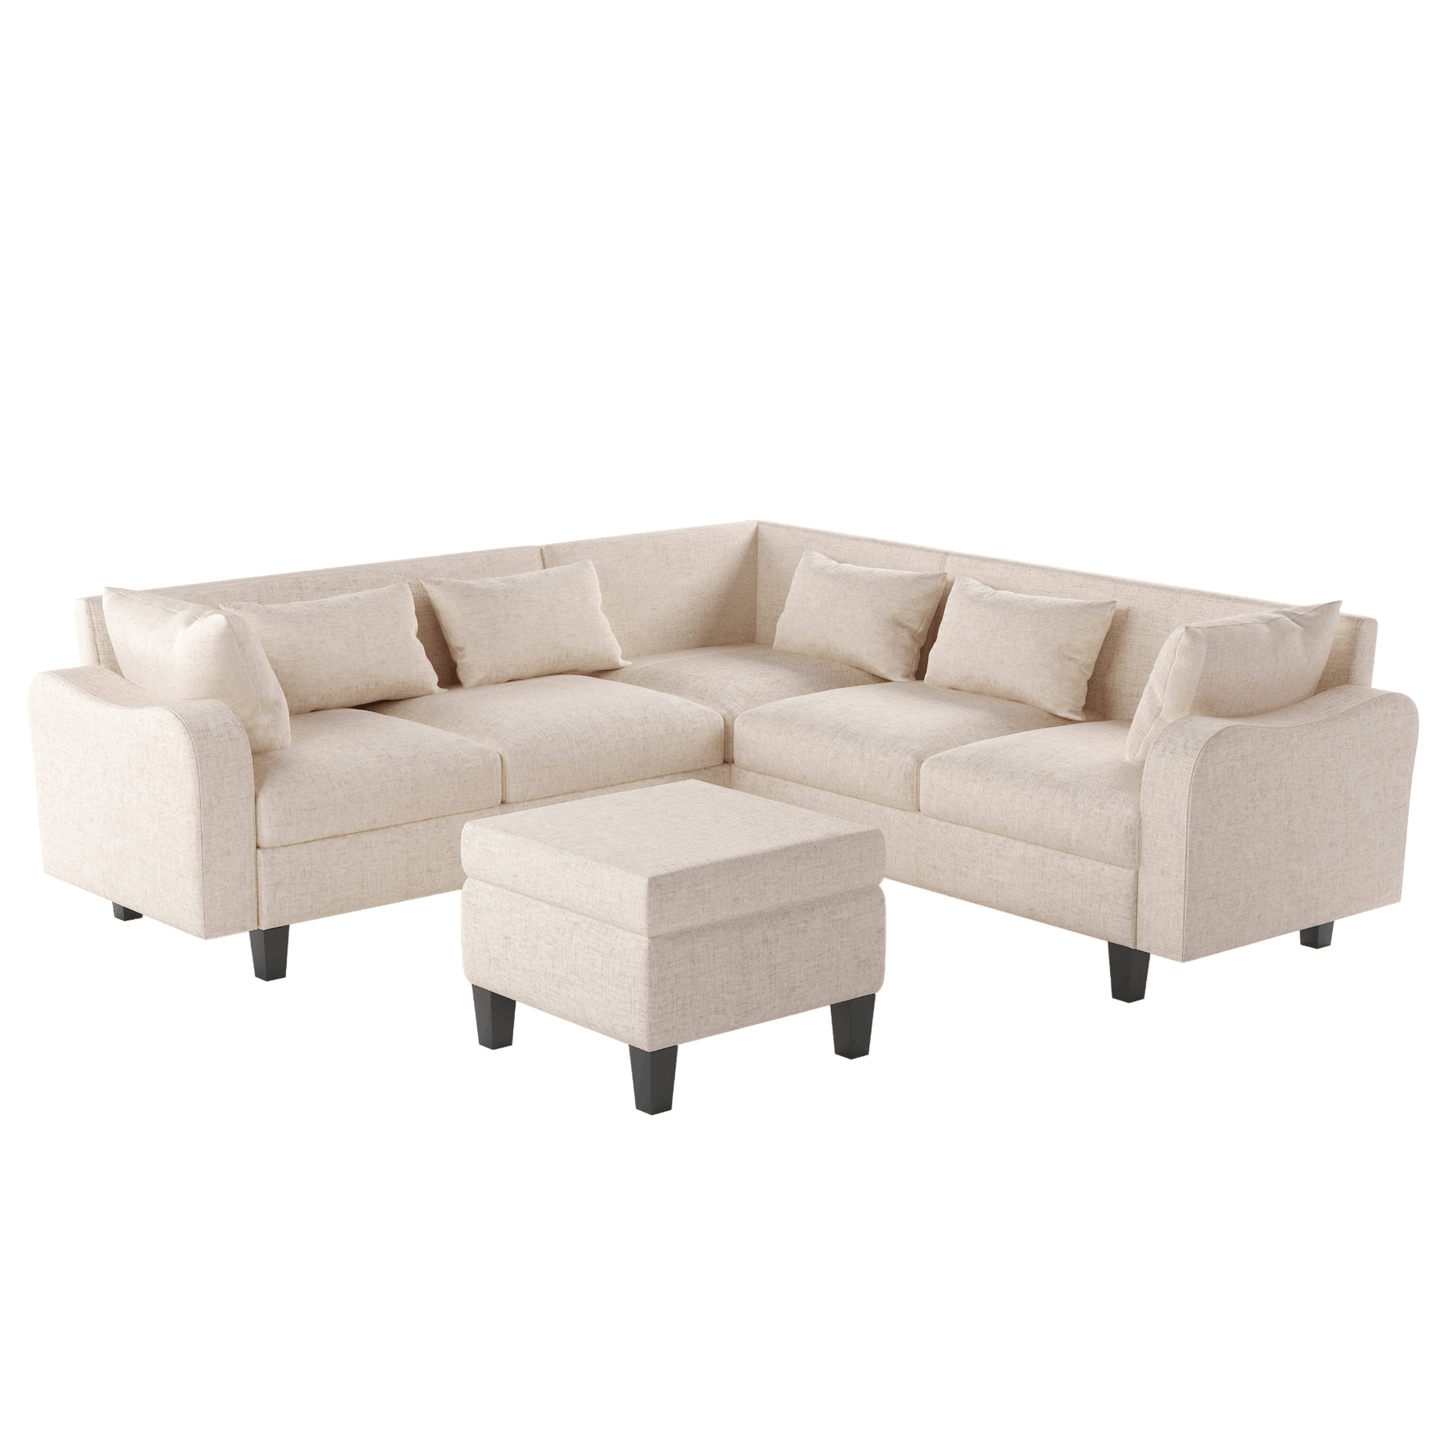 87" Modern Sectional Sofa with coffee table,6-Seat Couch Set with Storage Ottoman,Various Combinations,L-Shape Indoor Furniture with Unique Armrests for Living Room,Apartment, 2 Colors(6 pillows) 